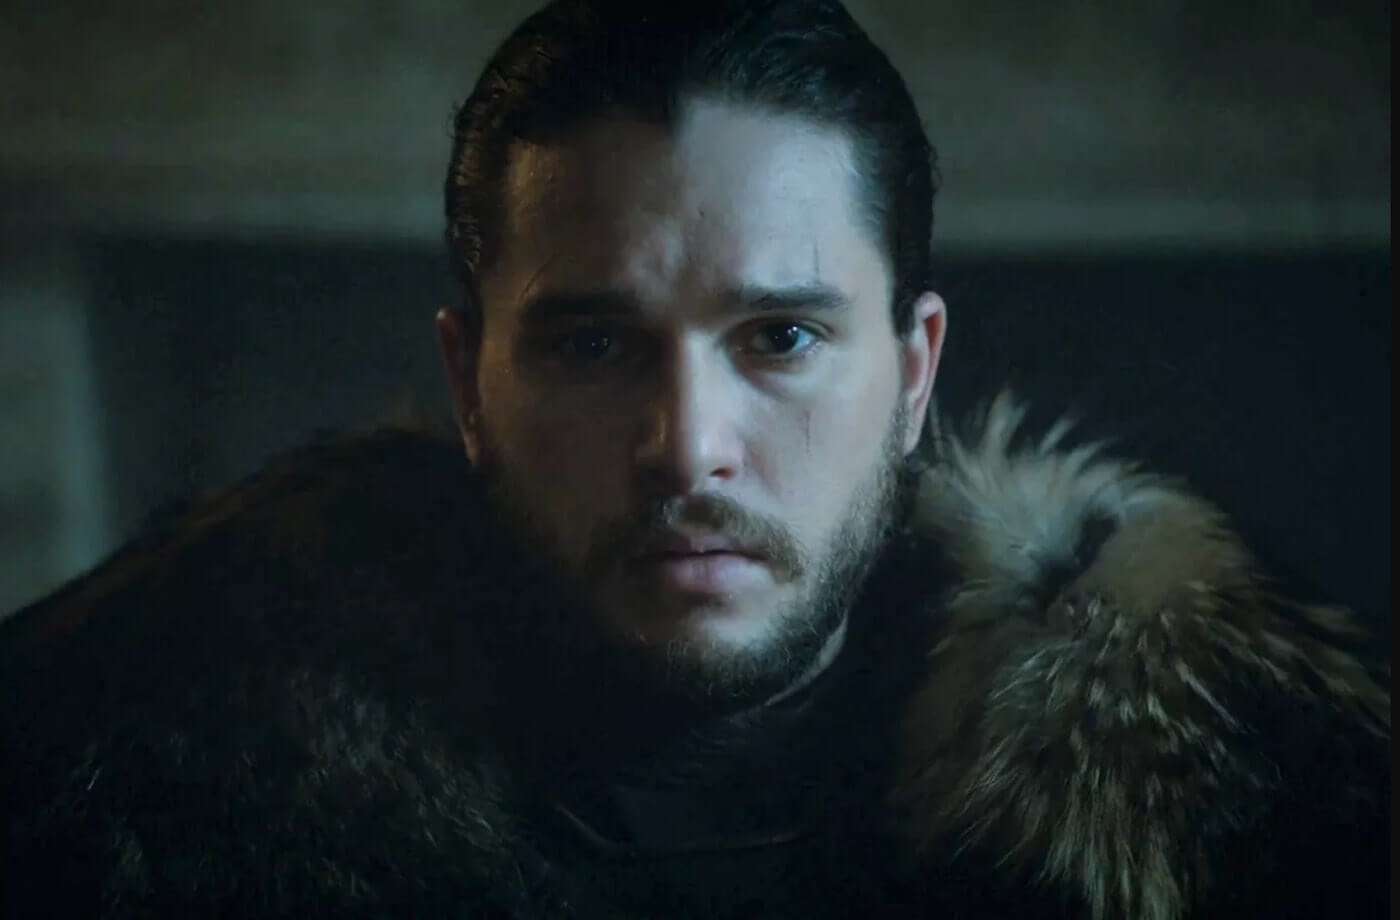 How to Create a TV Show Pitch Bible that Sells - Jon Snow